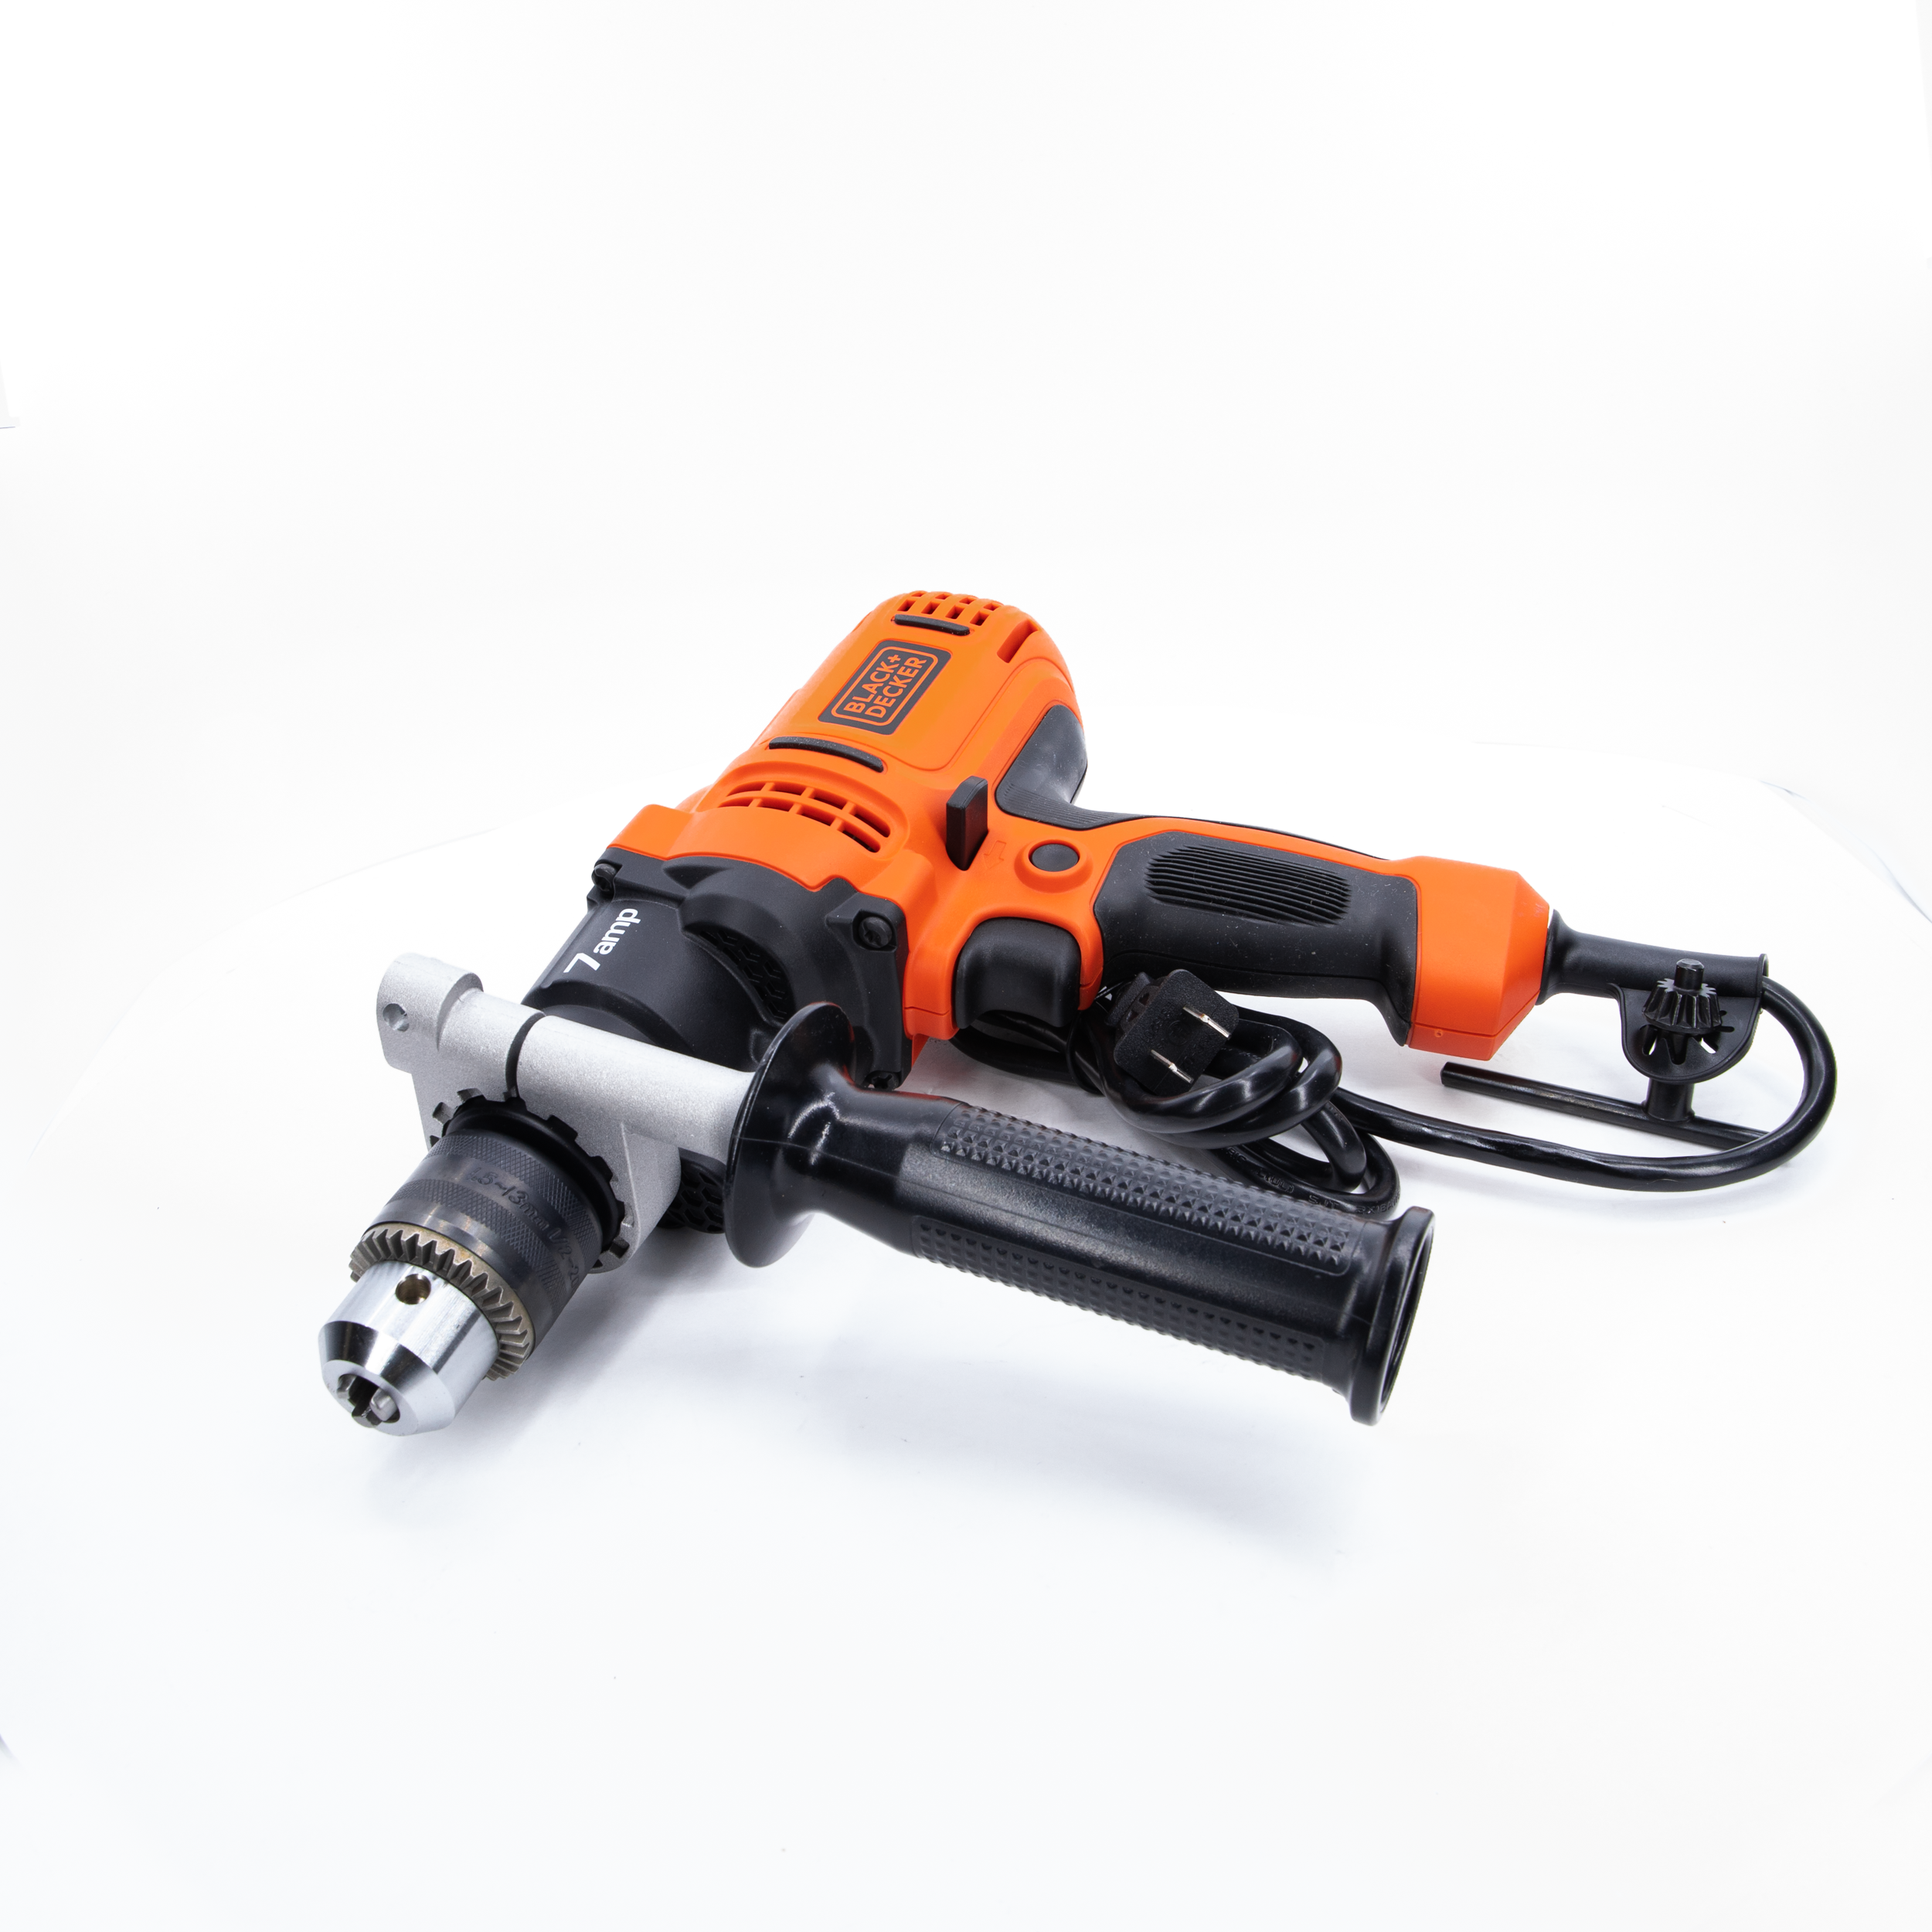 Black & Decker 1/2 Hammer Drill DR601 Corded Electric 6 Amp with